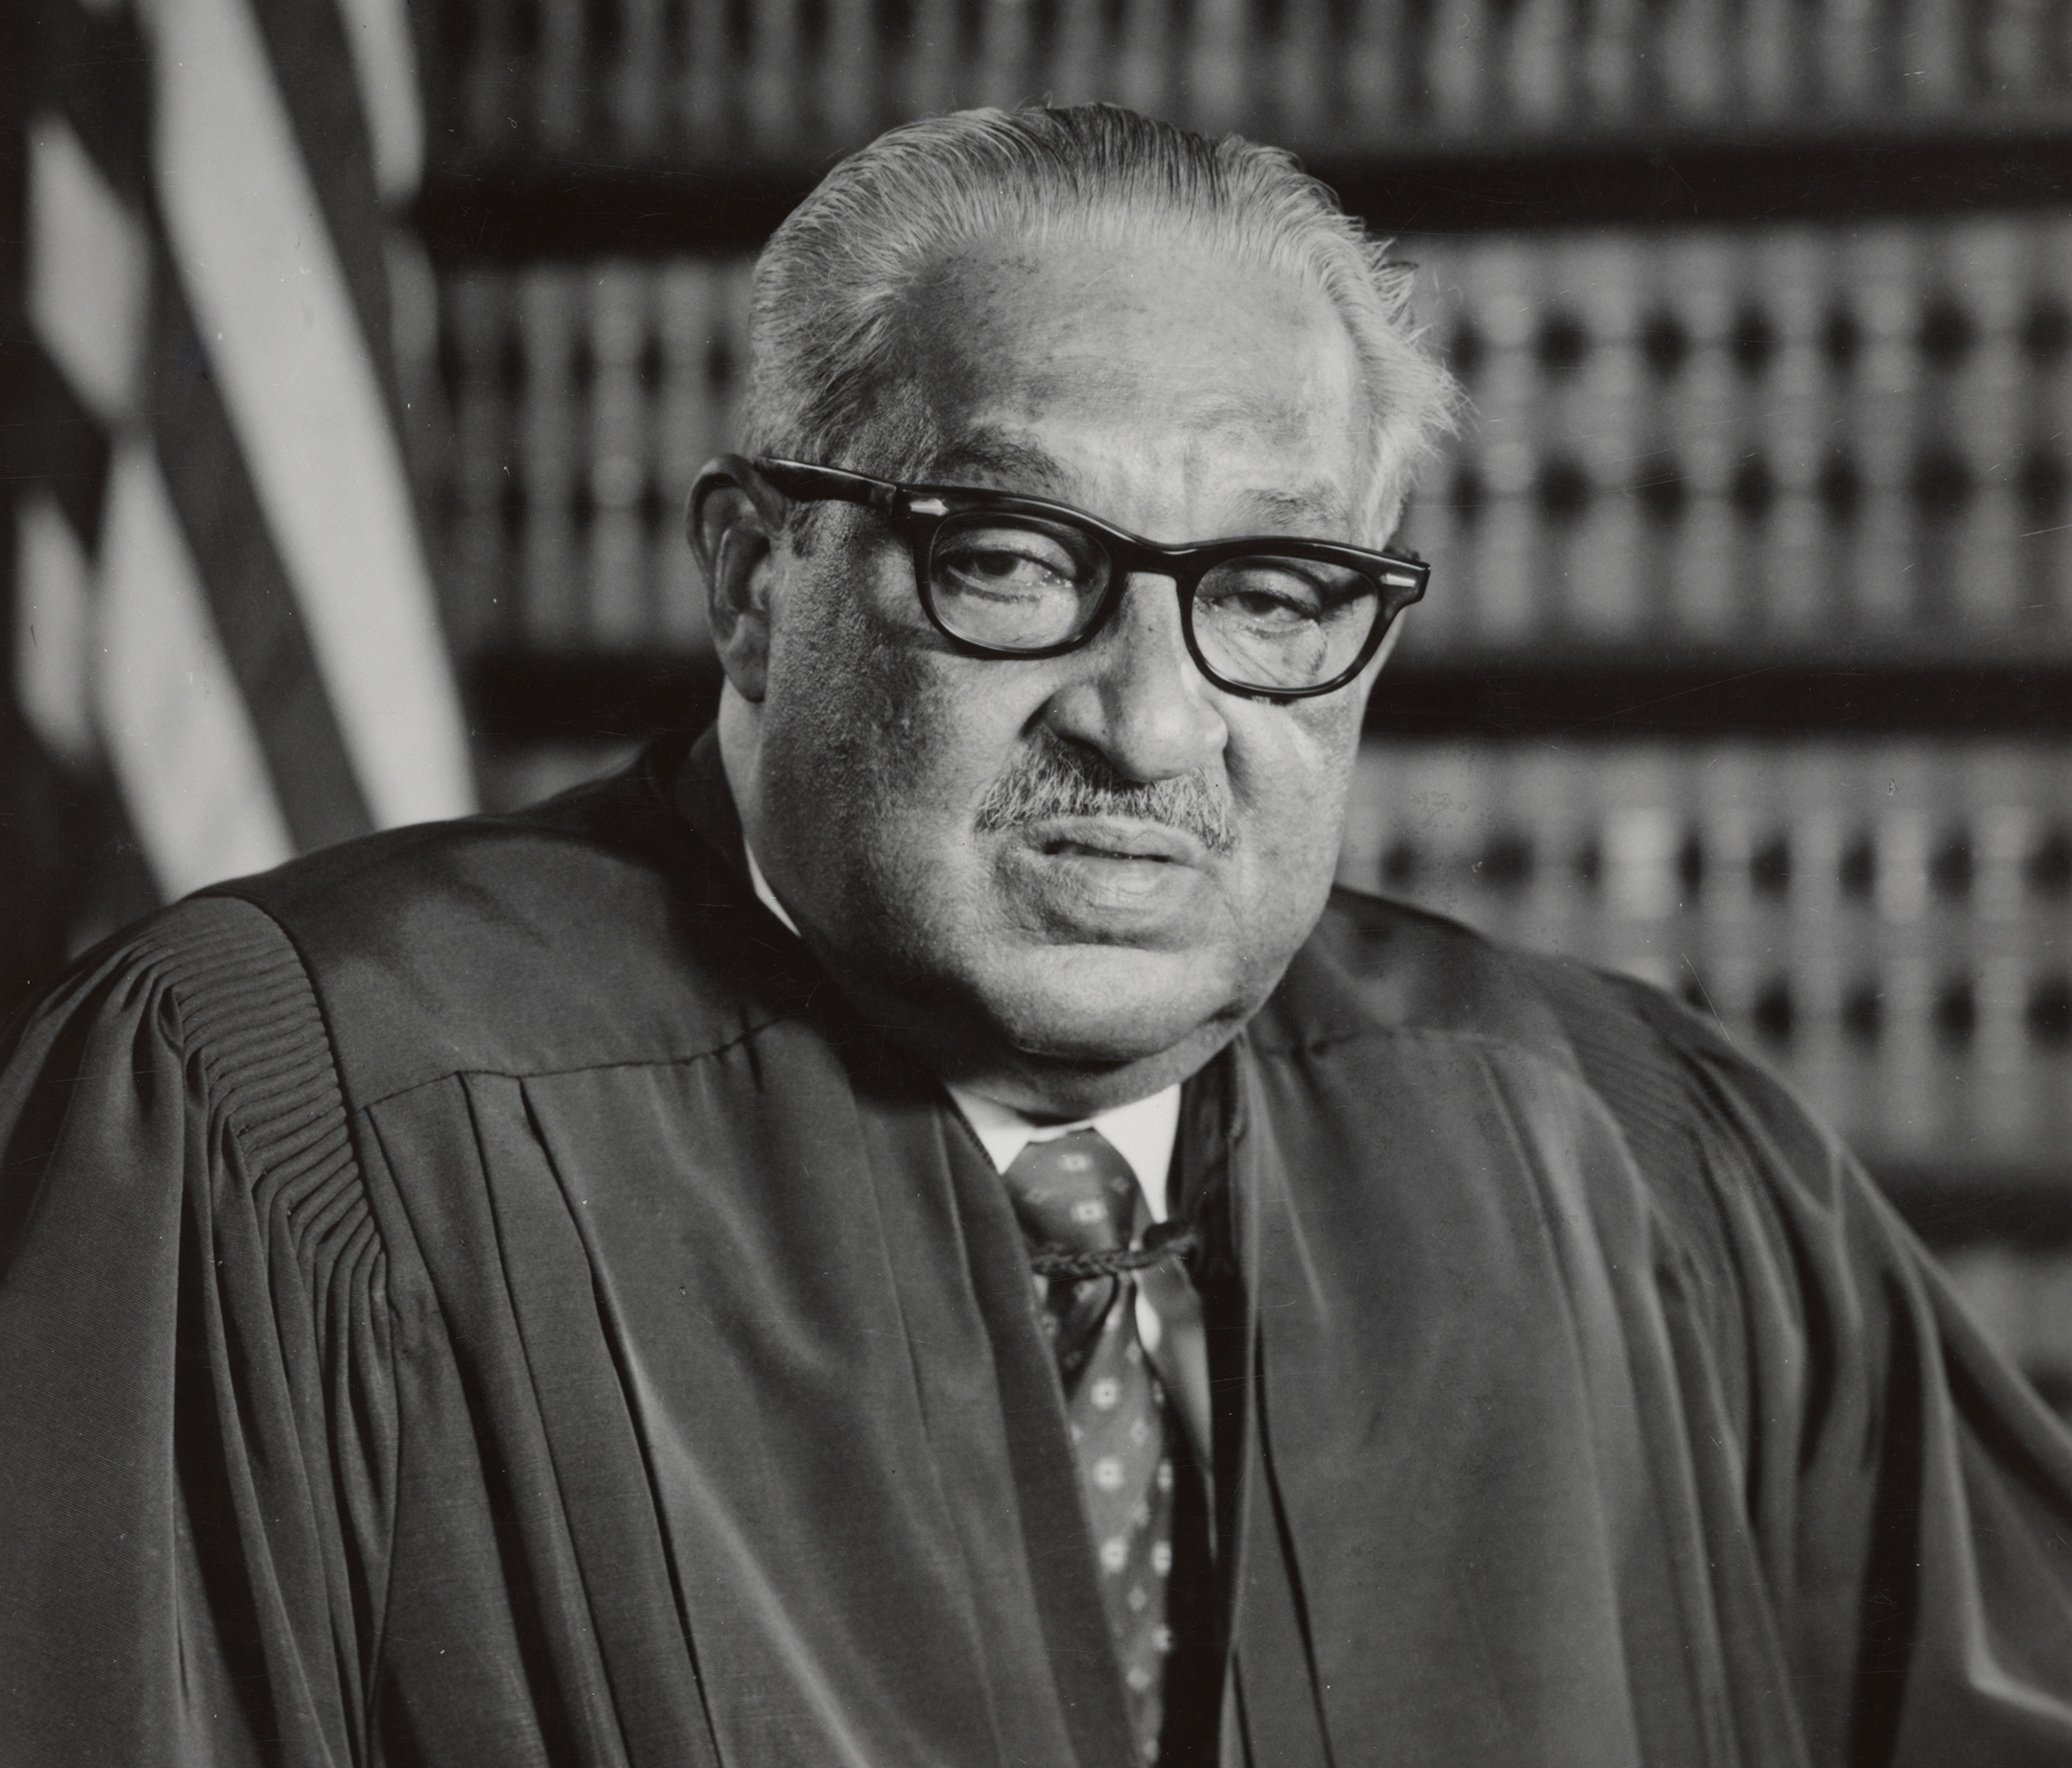 Black and white photo of Thurgood Marshall in his Supreme Court Justice robe